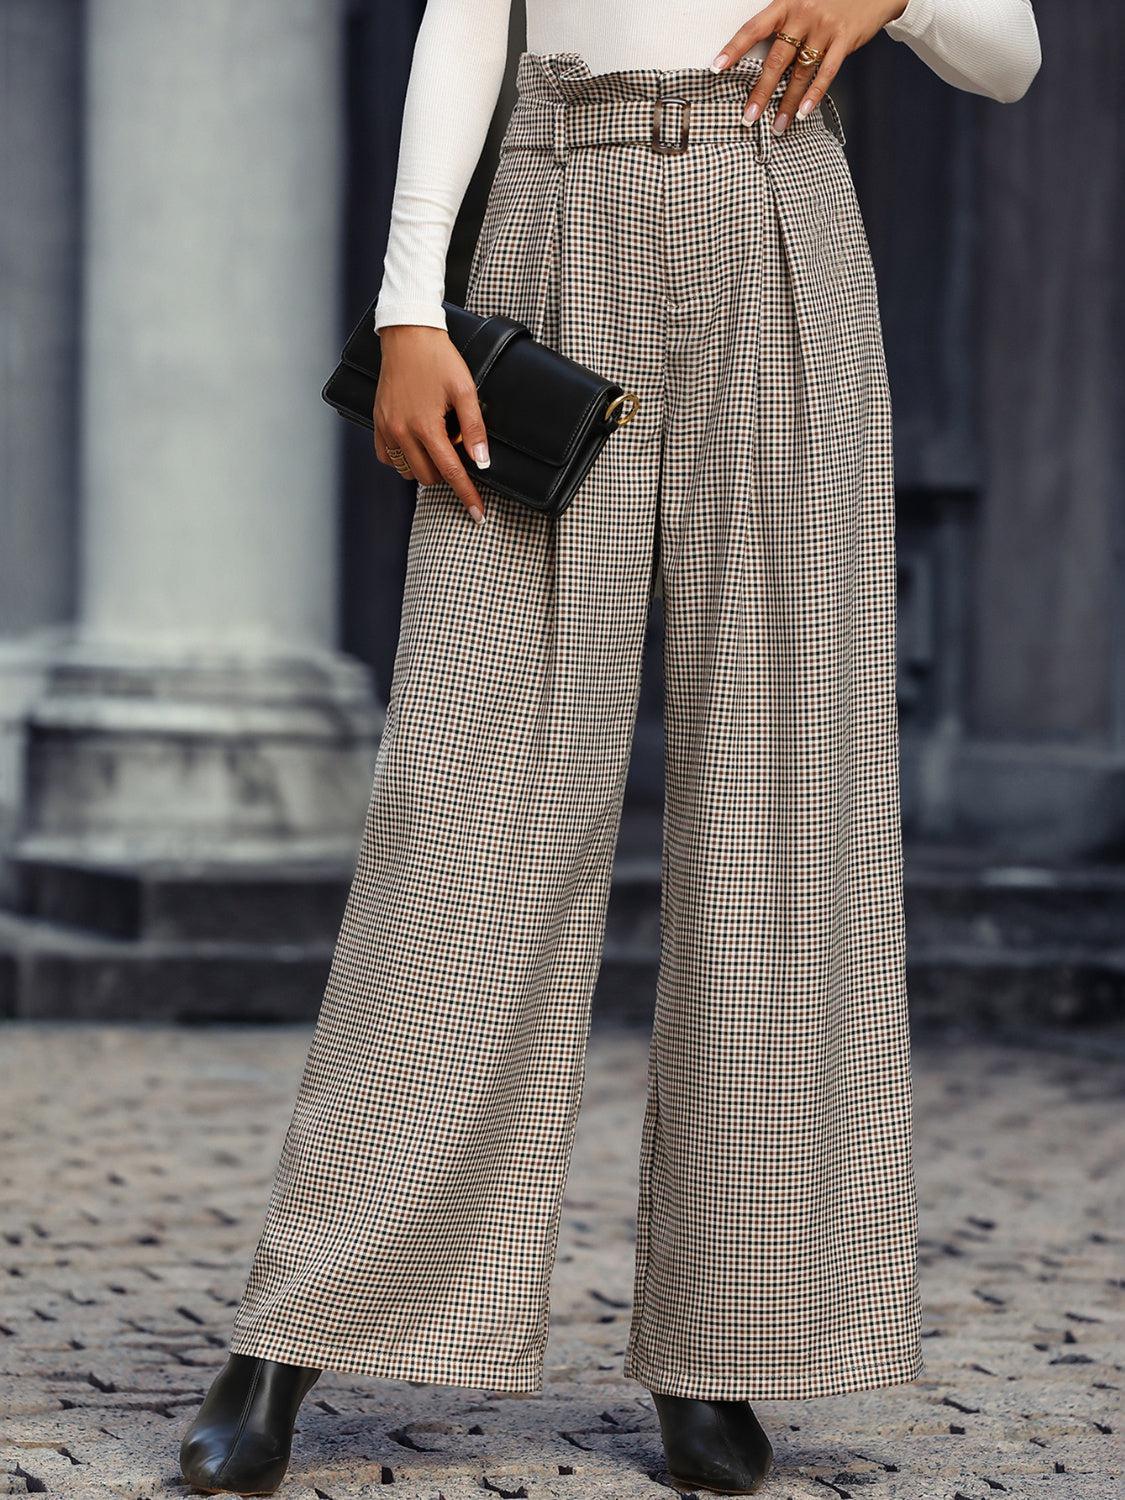 a woman in a white shirt and checkered pants